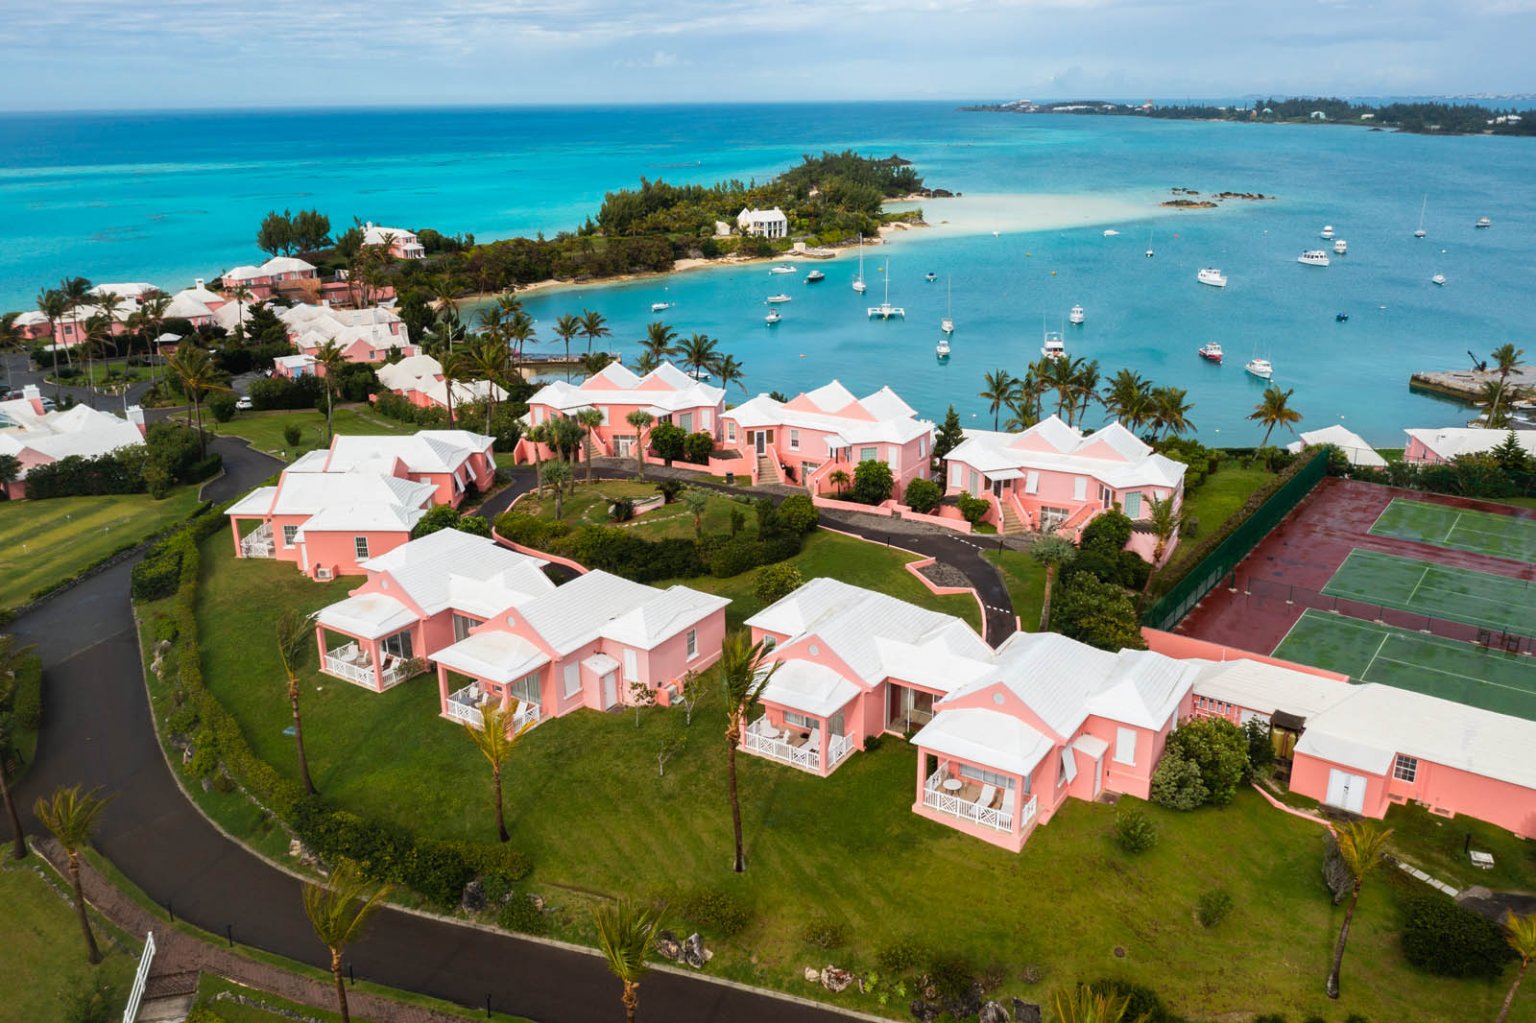 Aerial View Of Cambridge Beaches And Hotel In Bermuda 1536x1023 